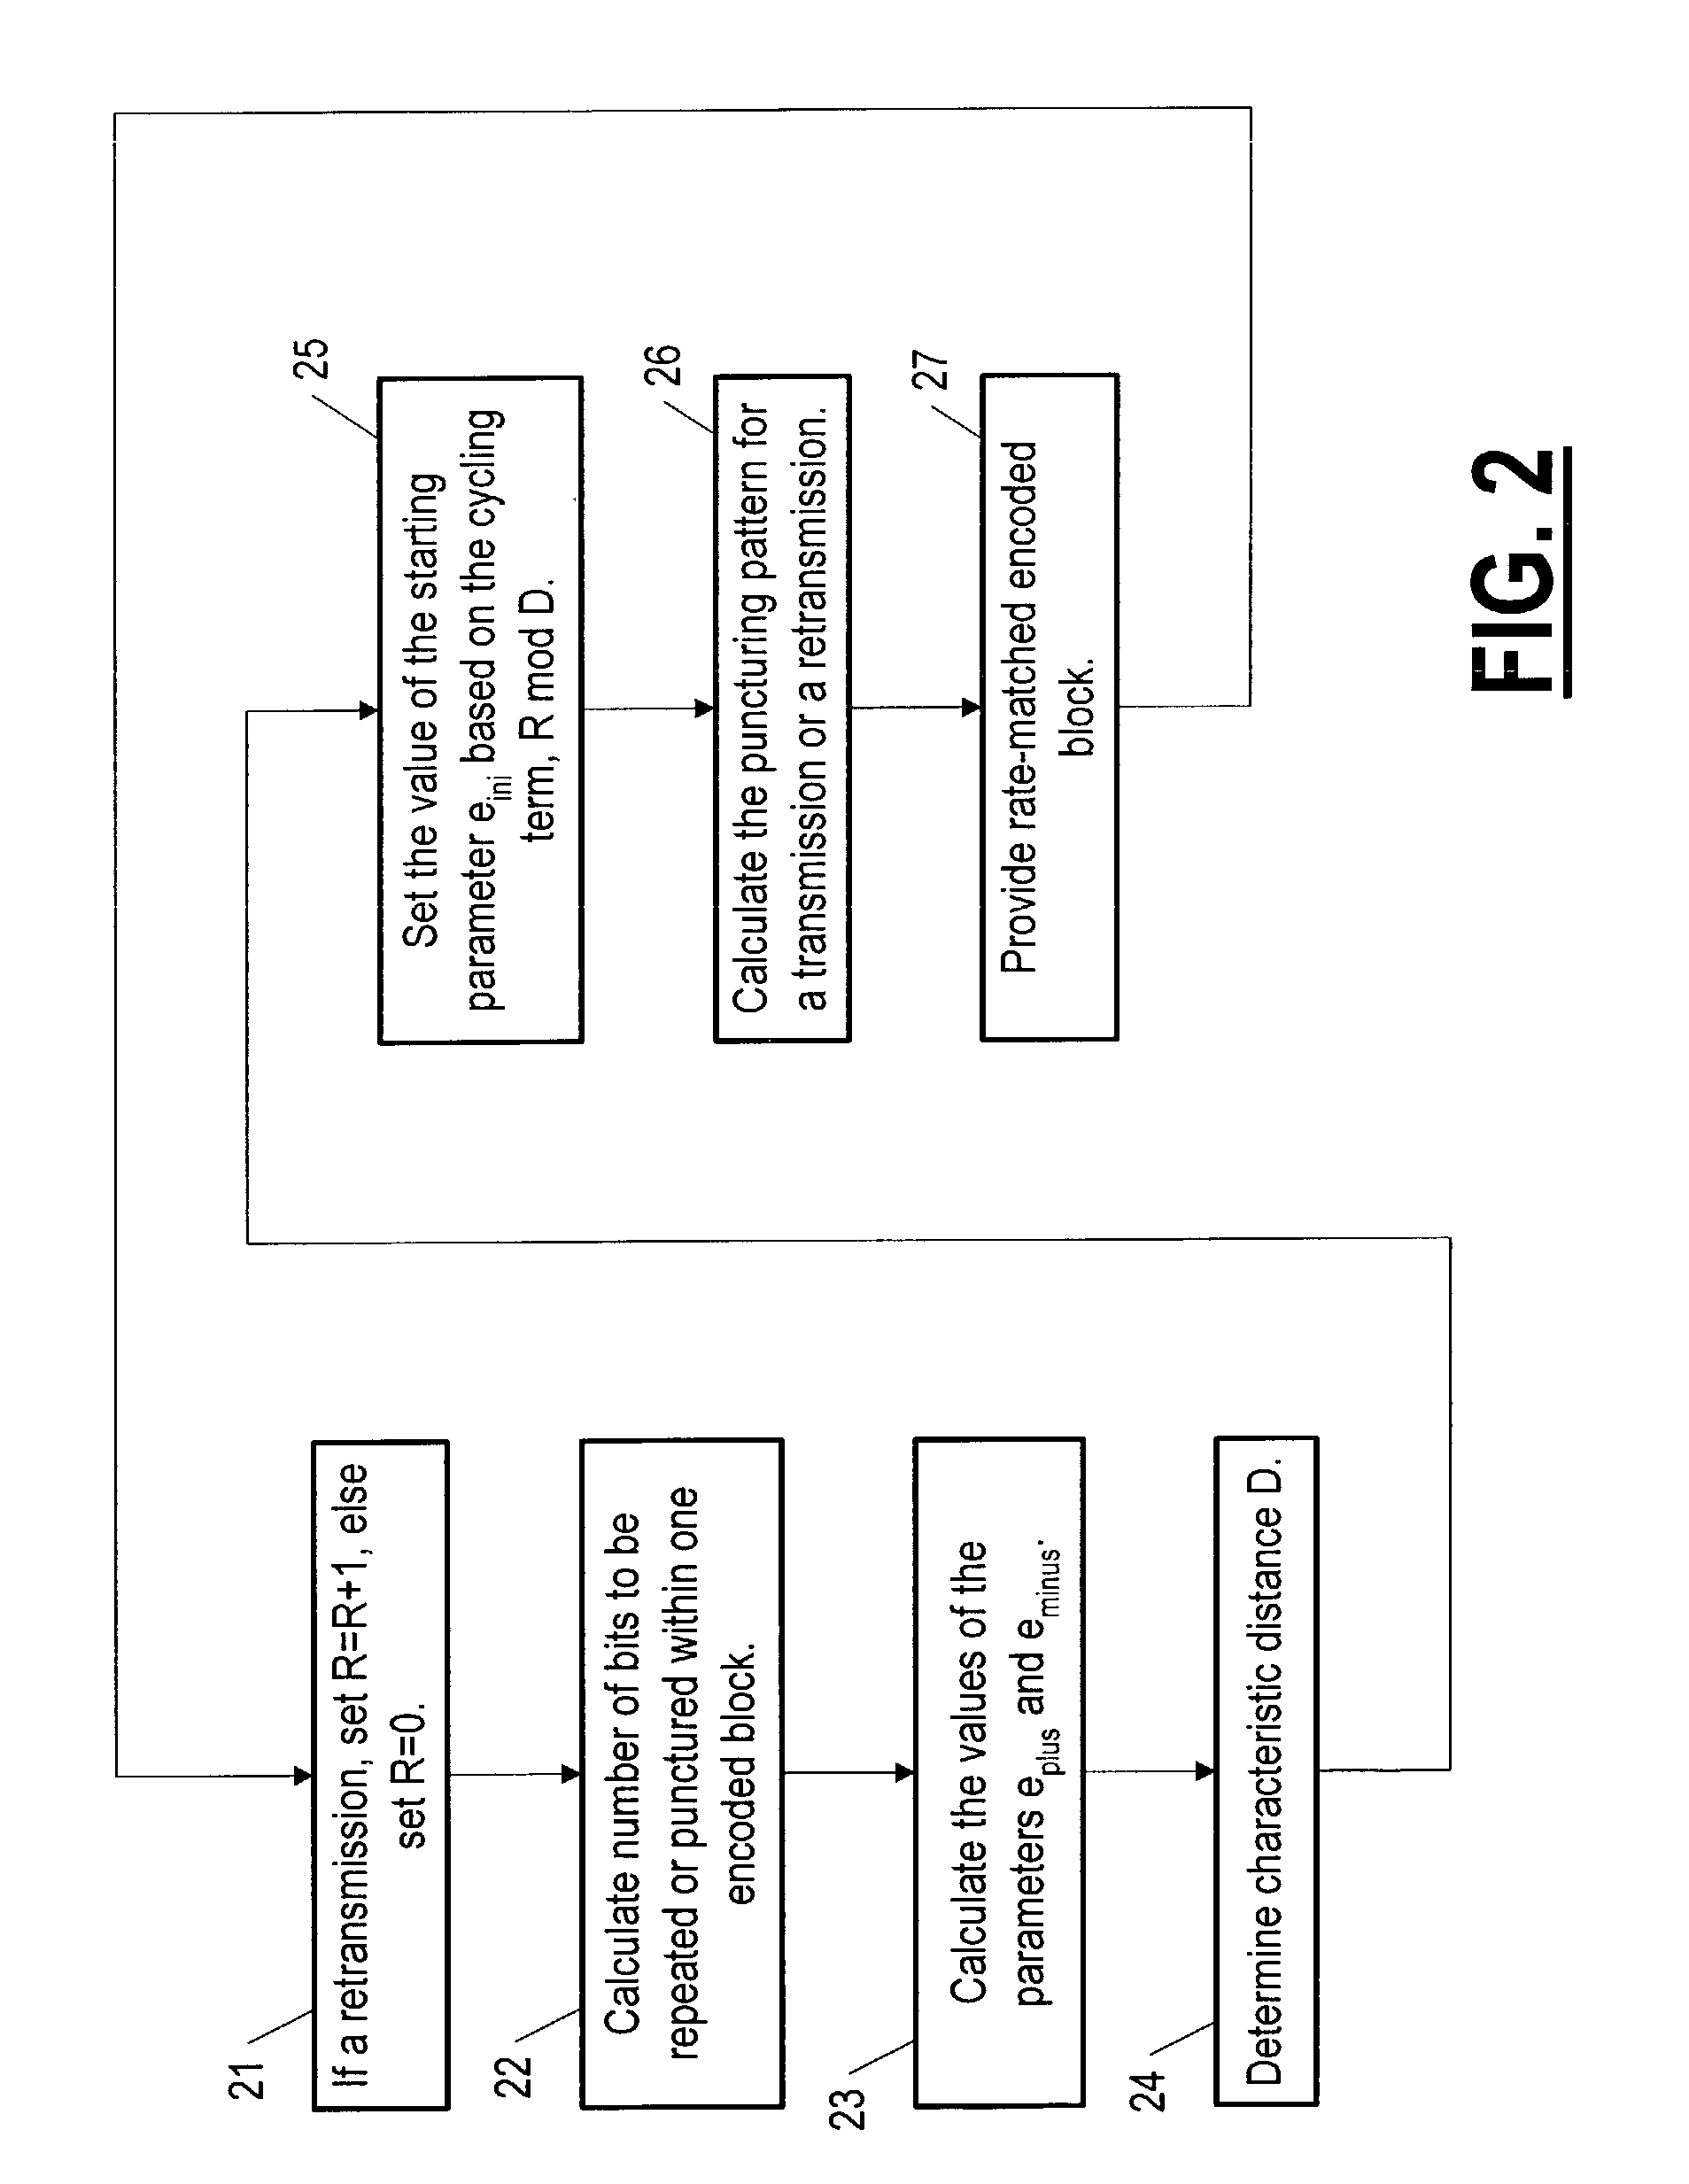 Method for rate matching to support incremental redundancy with flexible layer one